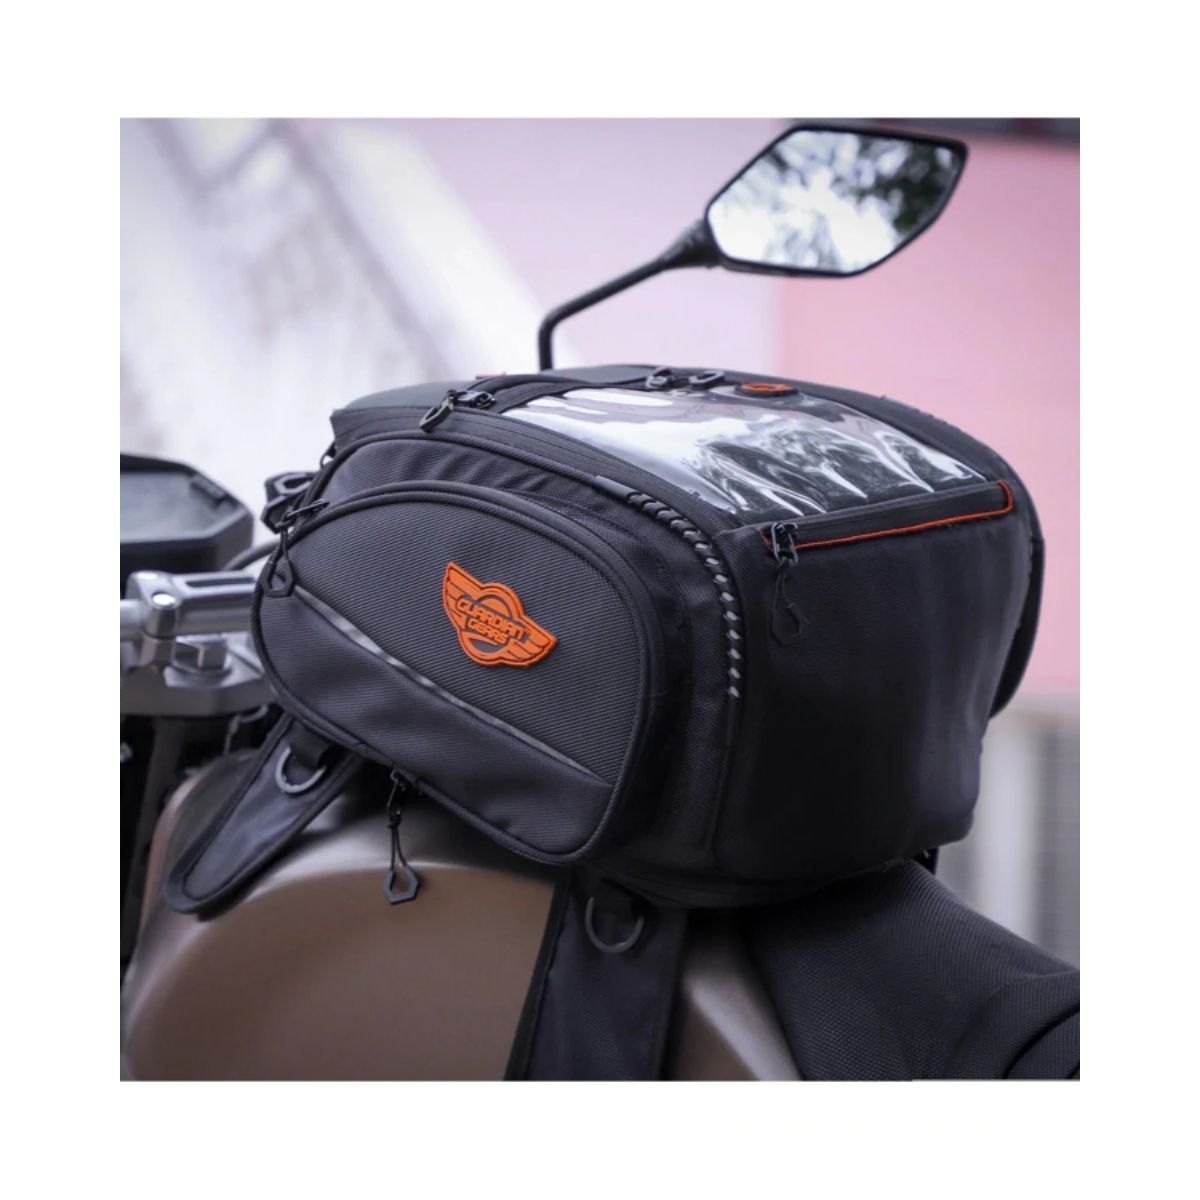 Jaws Magnetic 28L Tank Bag with Rain Cover - Black - 15